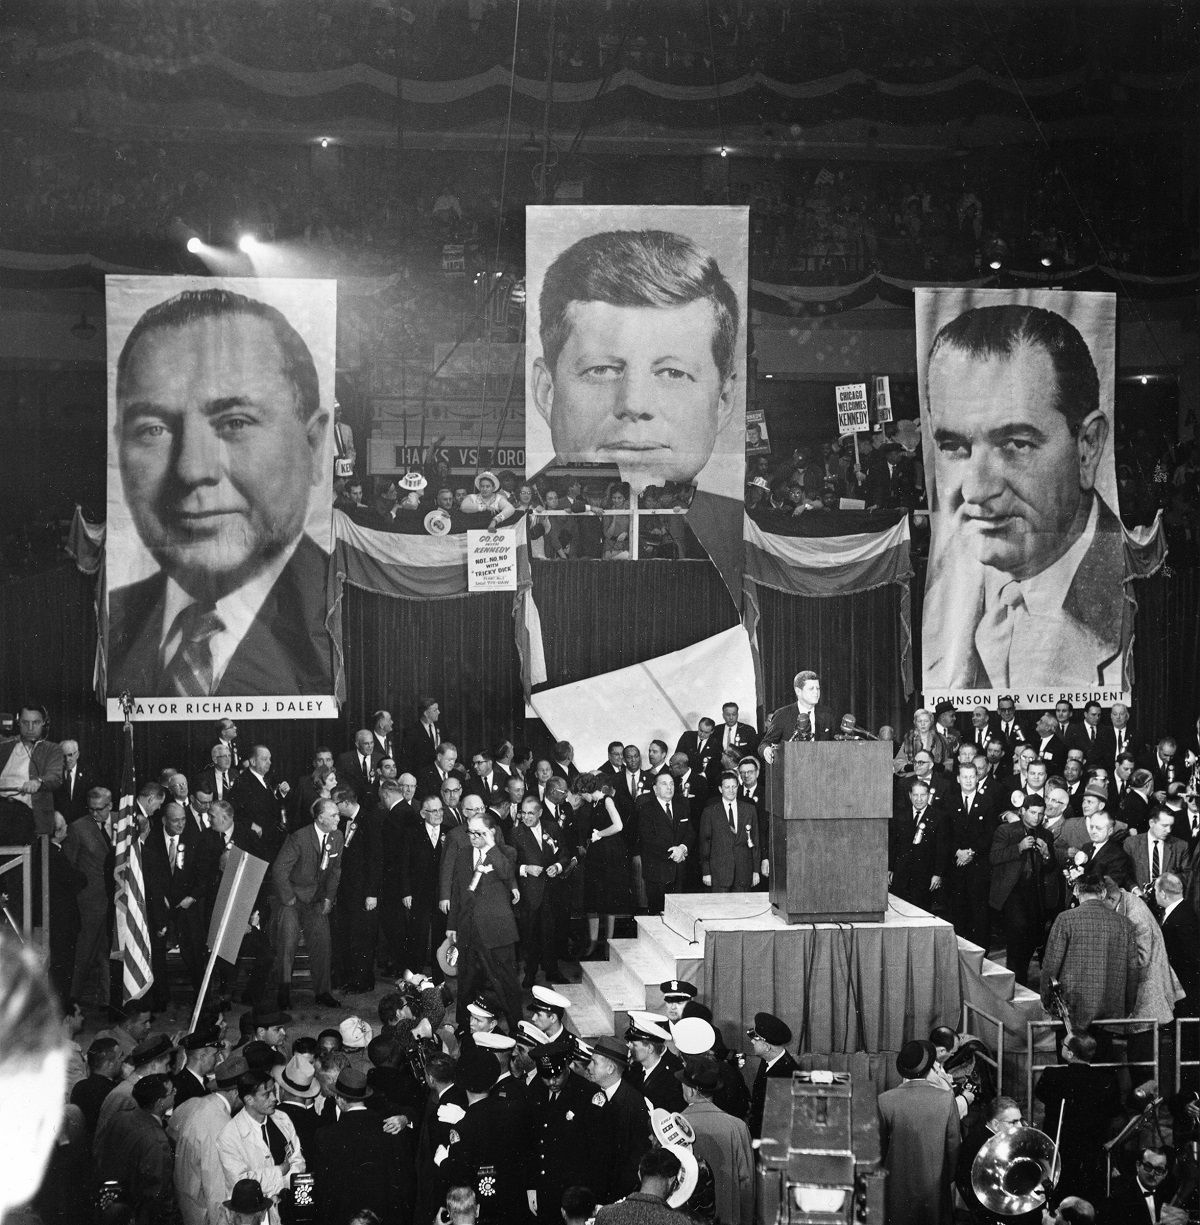 Sen. John F. Kennedy speaks at Chicago Stadium, Ill., Nov. 4, 1960.  Supporters standing on the balcony behind Kennedy have torn away lower half of enlarged picture of the Democratic candidate for president to get a view of the man himself.  Standing on the platform behind Kennedy are his sister, Eunice Shriver, looking back, Chicago Mayor Richard Daley, center, and Otto Kerner, Democratic candidate for Illinois governor. (AP Photo) (AP Photo)